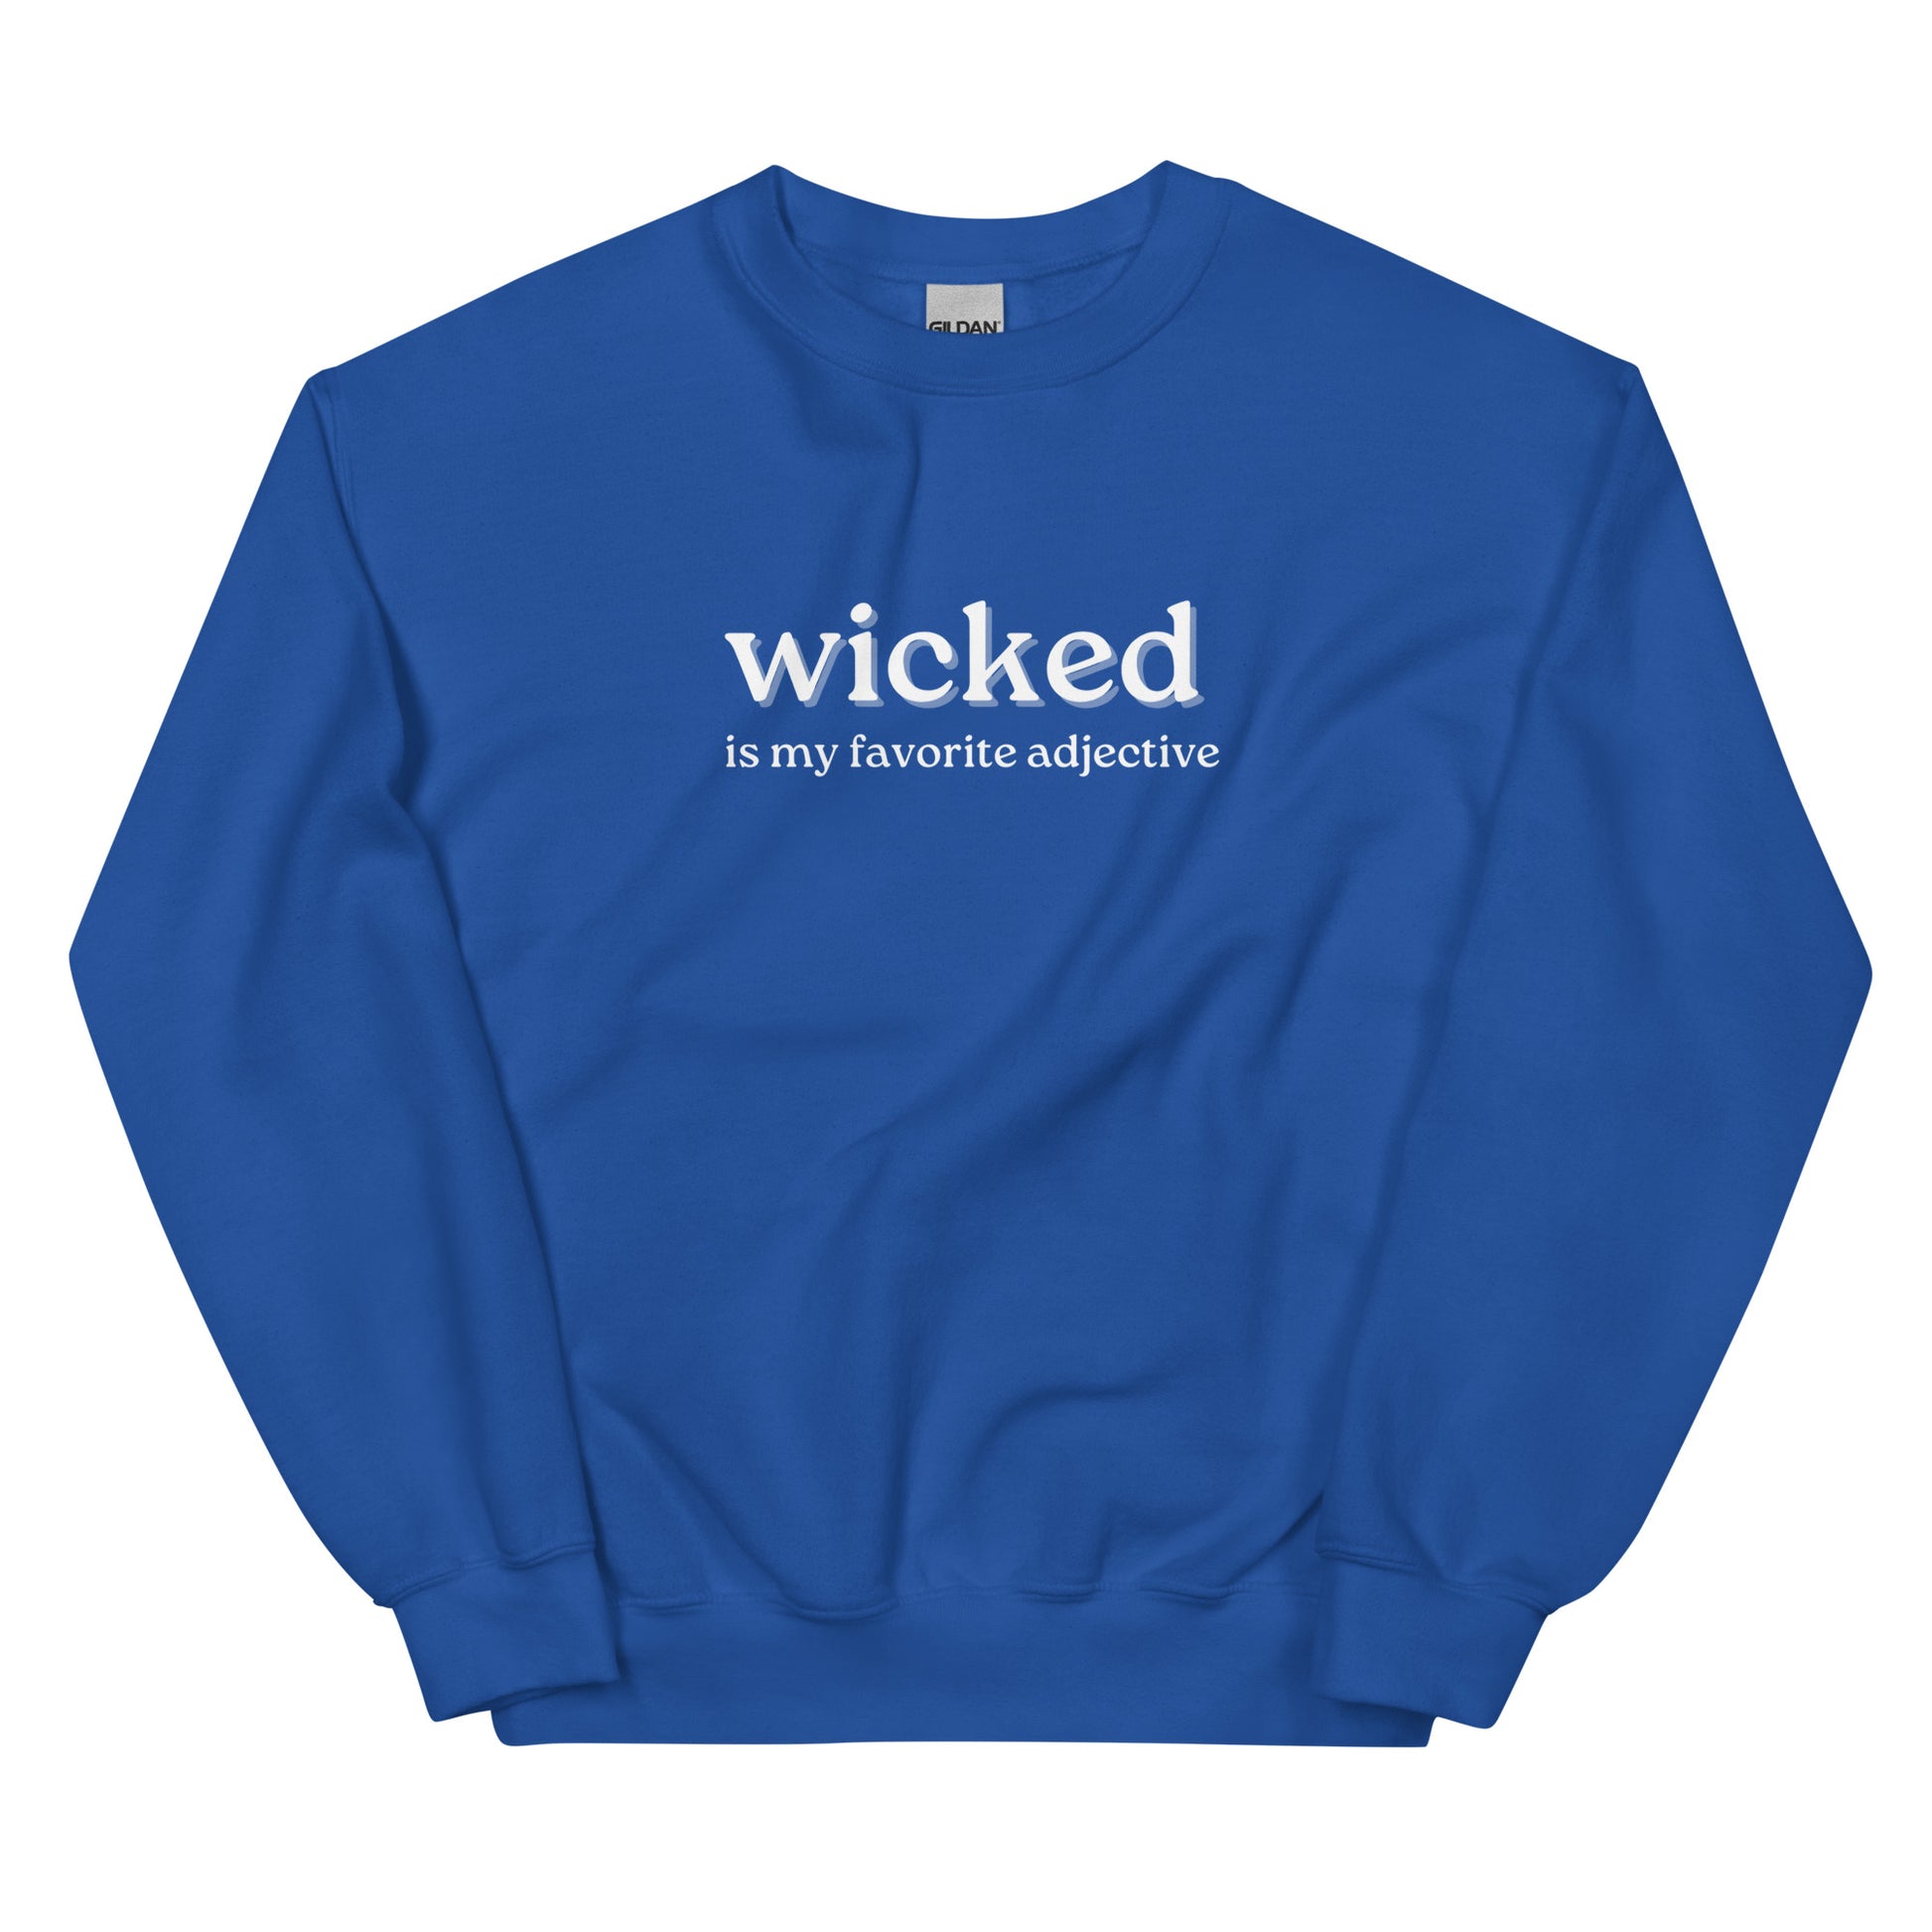 royal blue crewneck that says "wicked is my favorite adjective" in white lettering